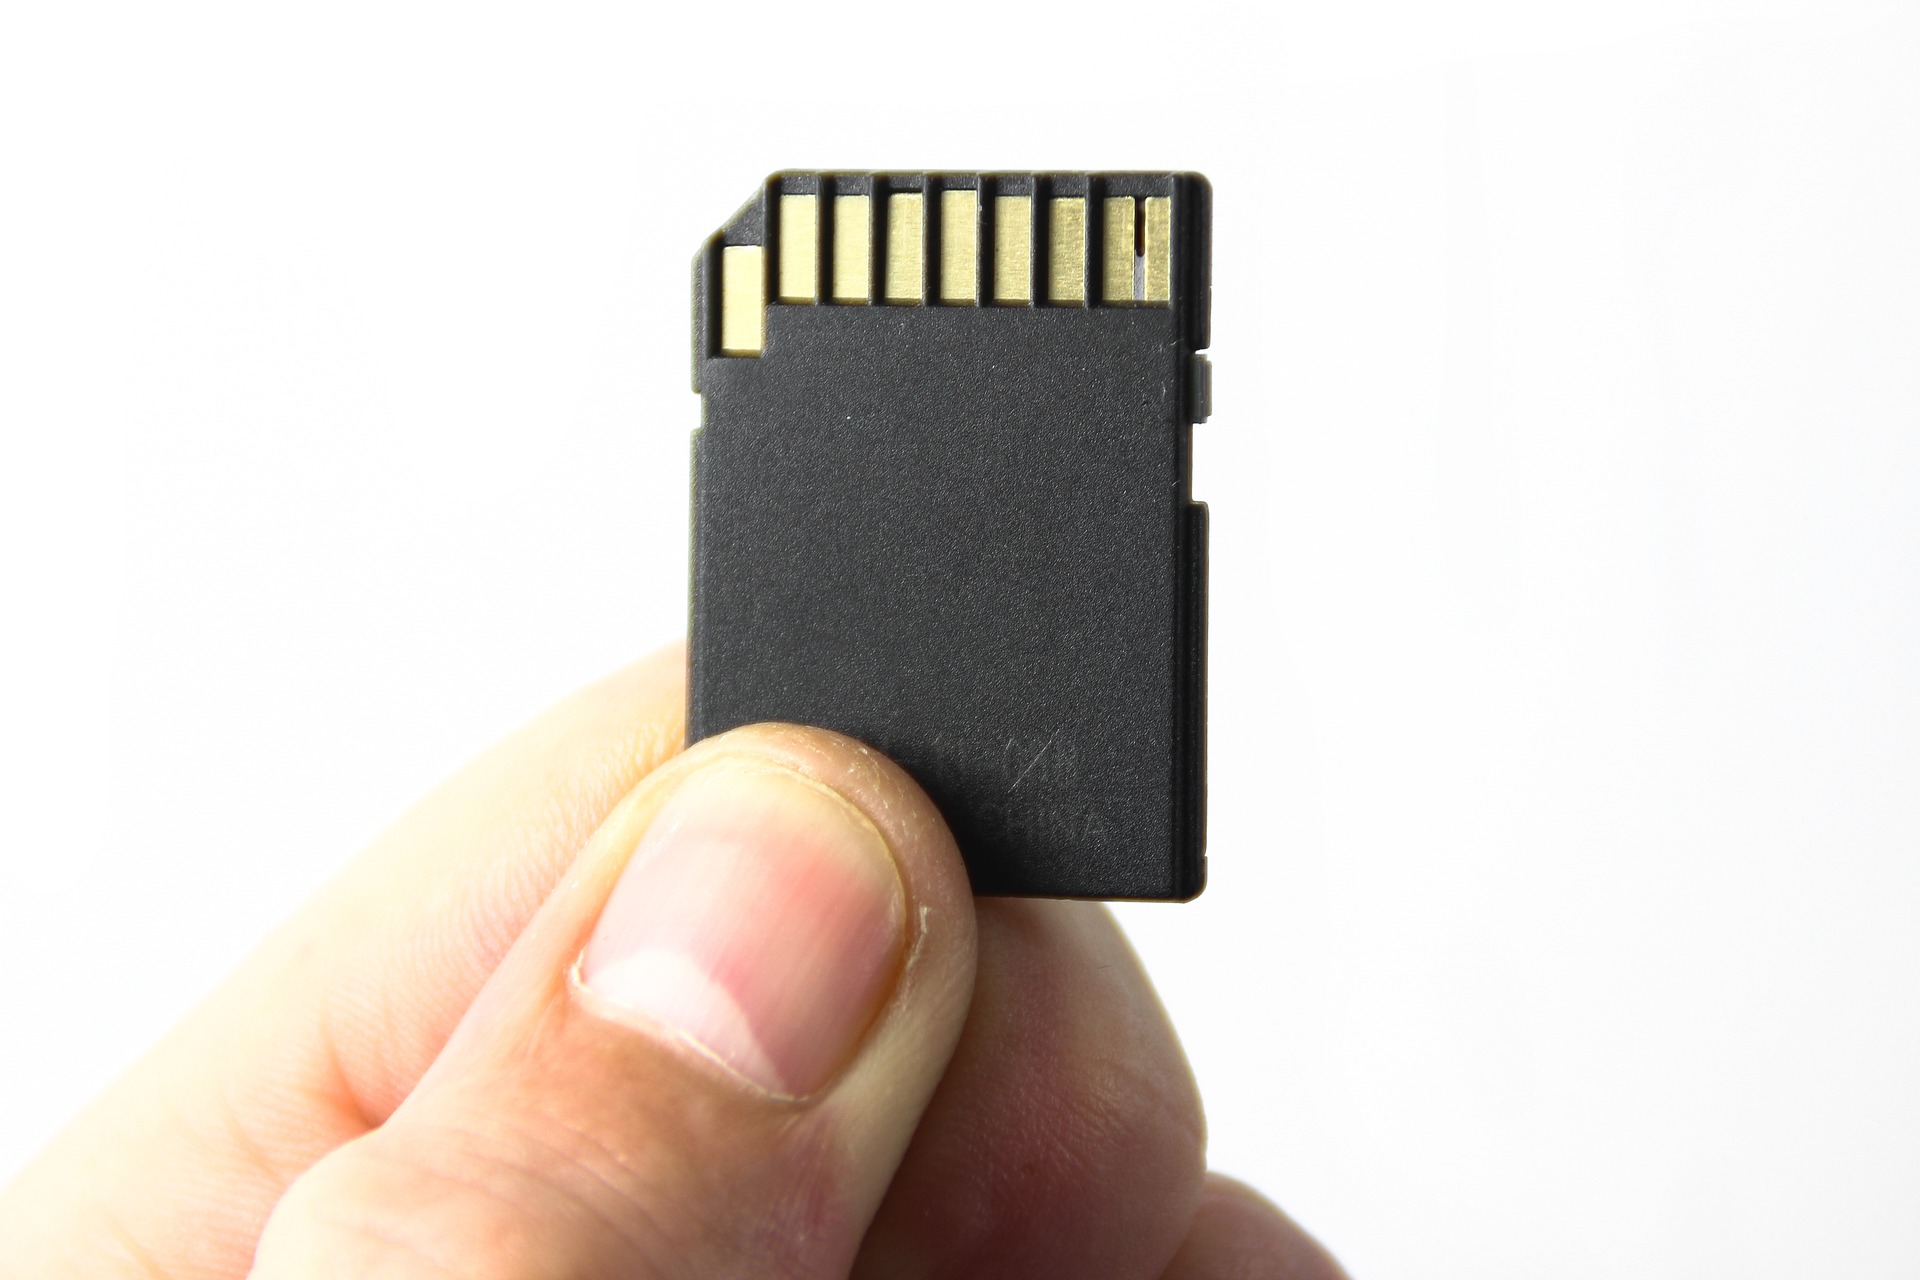 holding a memory card